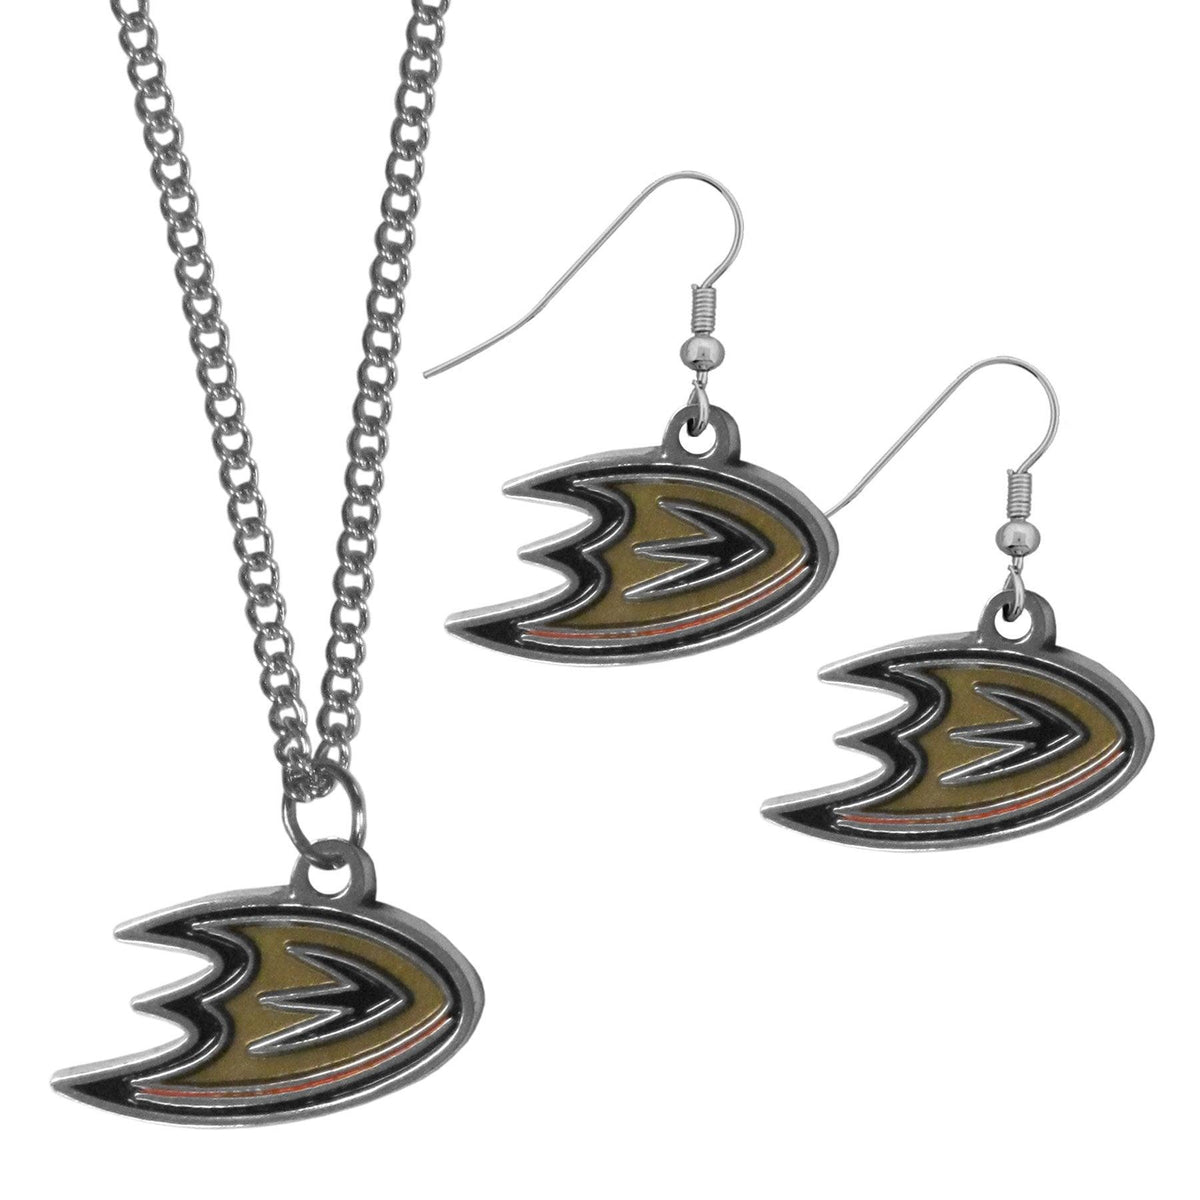 Anaheim Ducks® Dangle Earrings and Chain Necklace Set - Flyclothing LLC